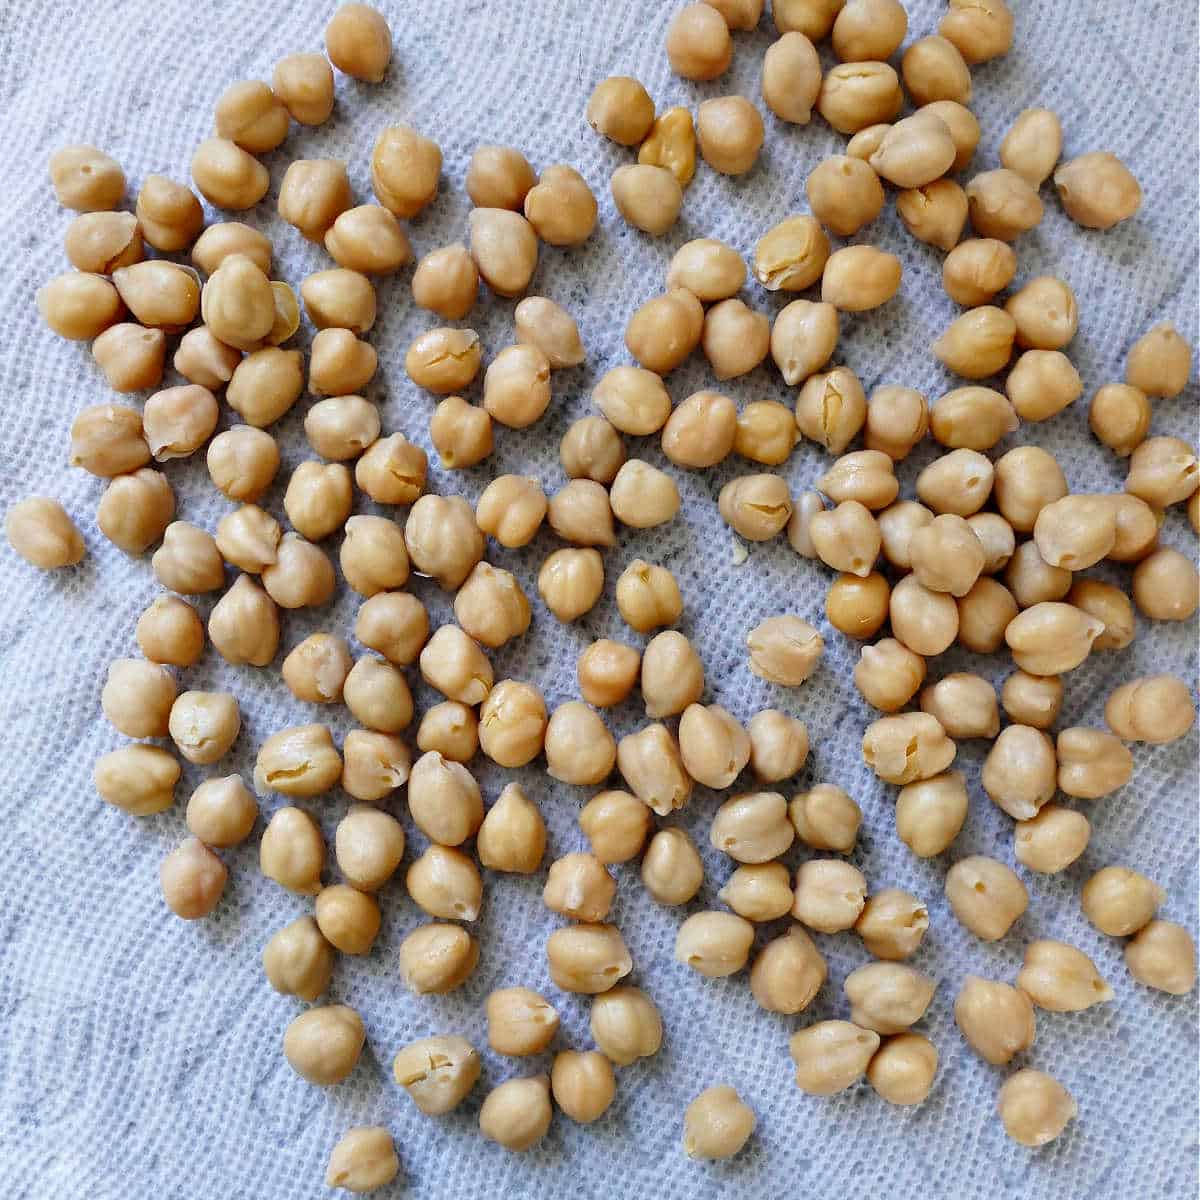 rinsed chickpeas on a paper towel drying before being cooked